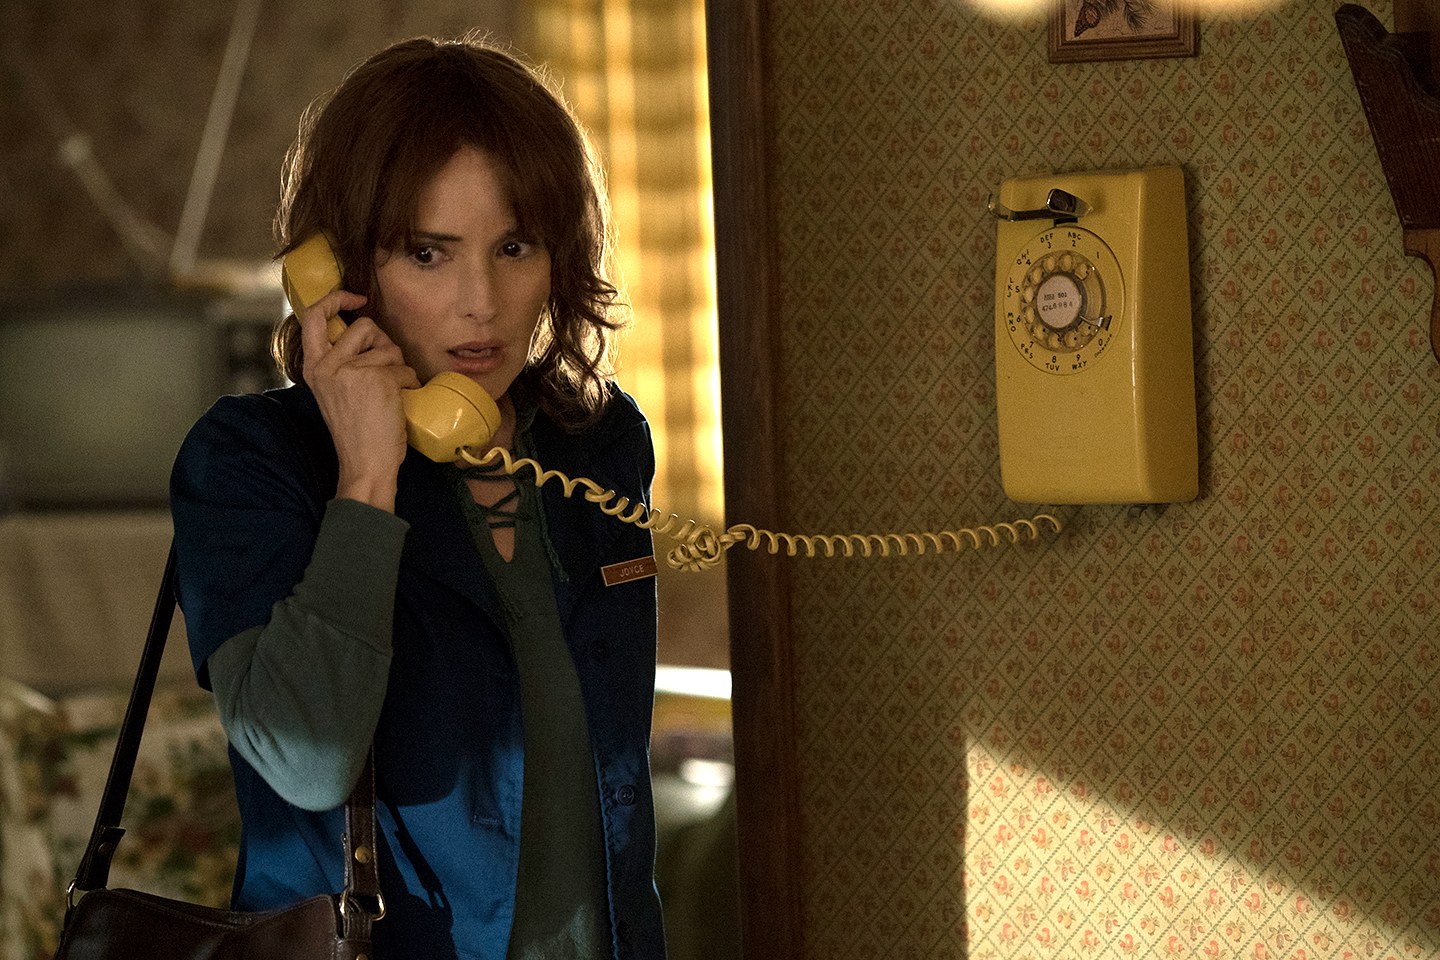 Joyce Byers (Winona Ryder) answers the telephone in Netflix's series Stranger Things